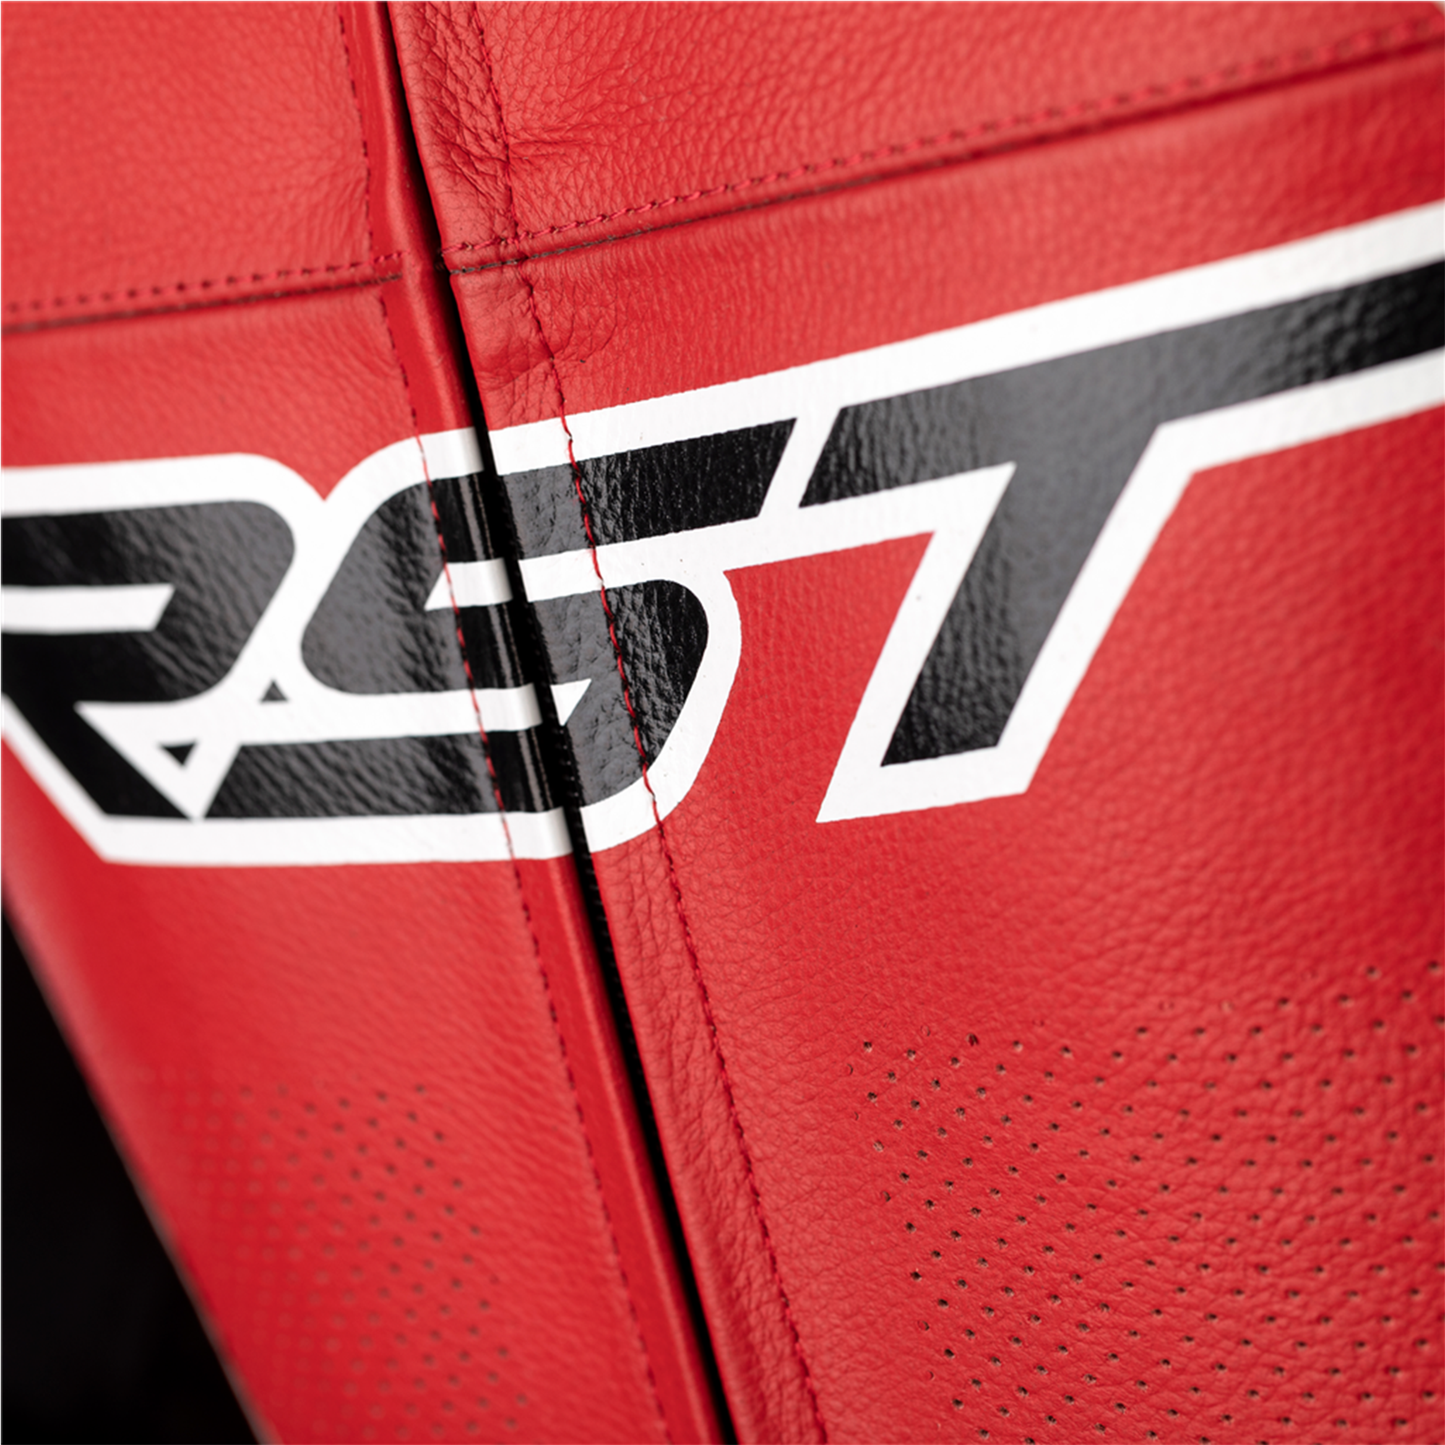 RST Tractech Evo 4 One Piece Suit - Red(2)/Black/White